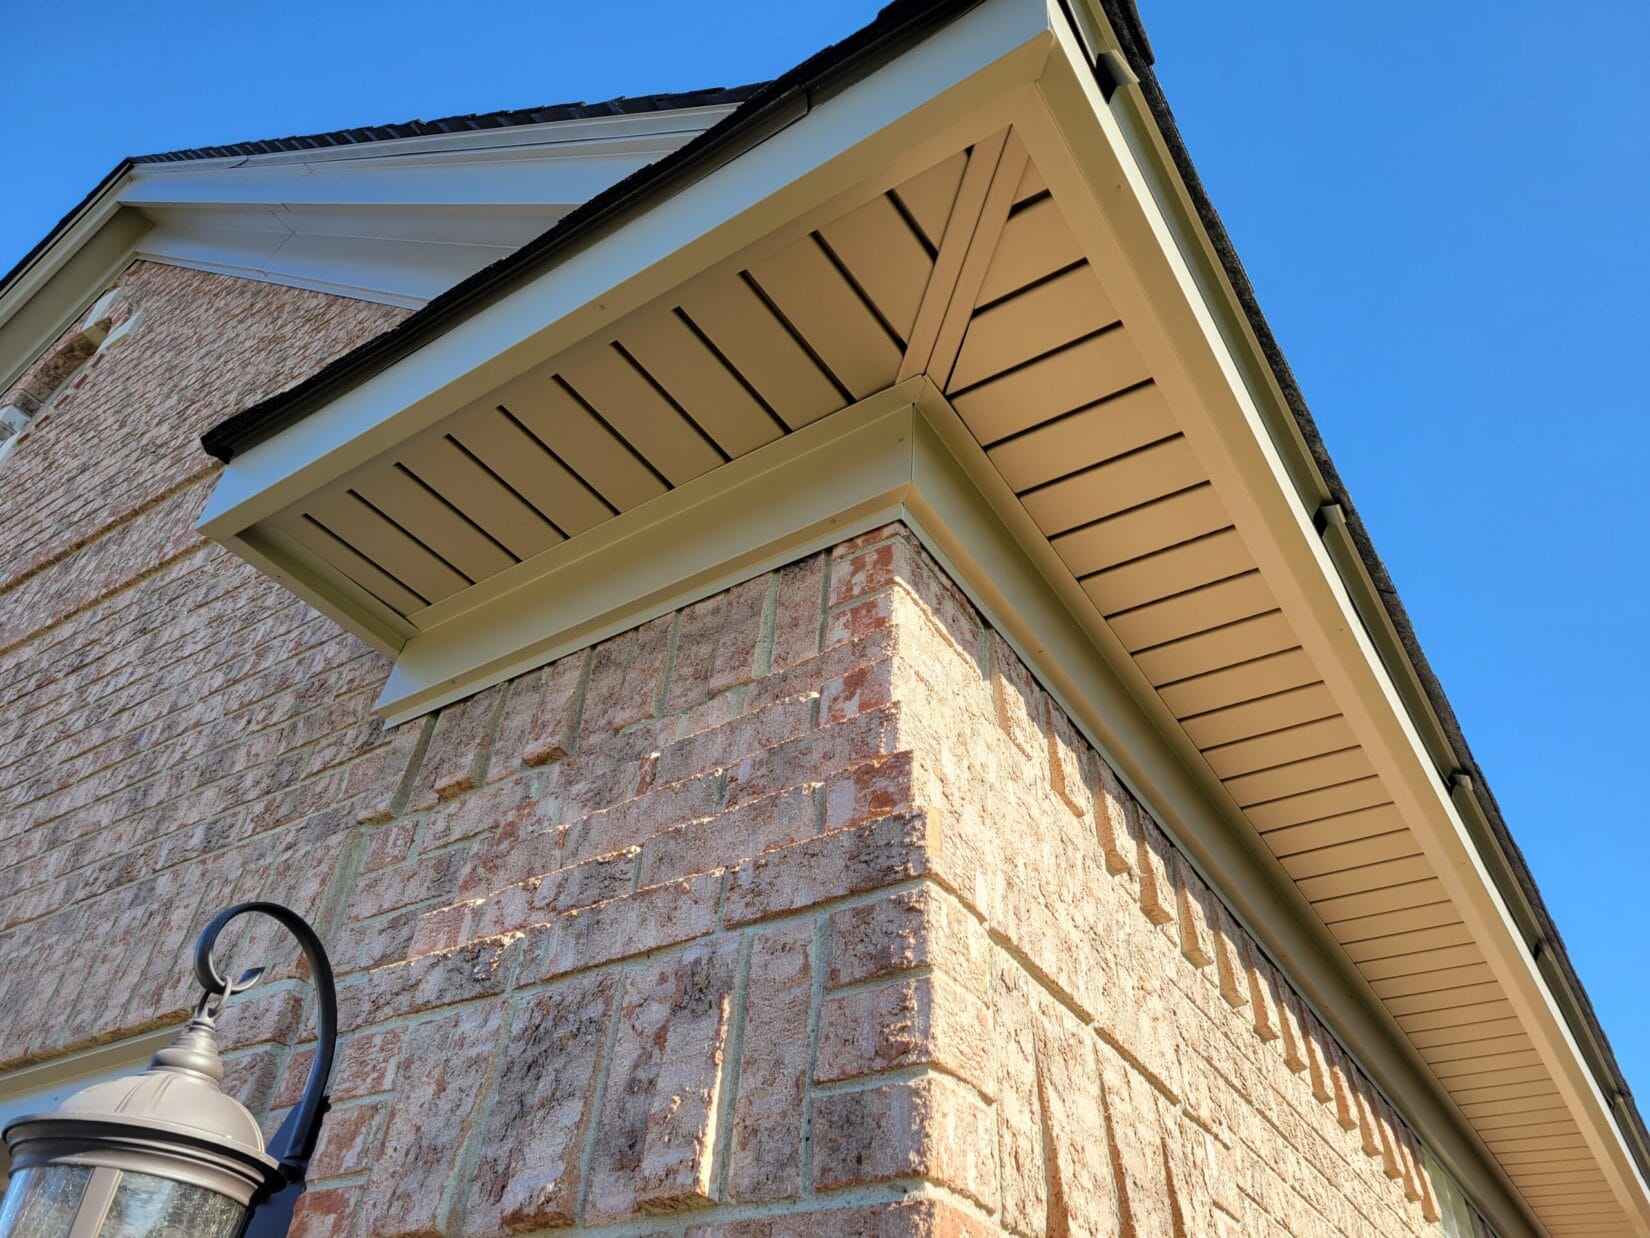 New soffit and fascia